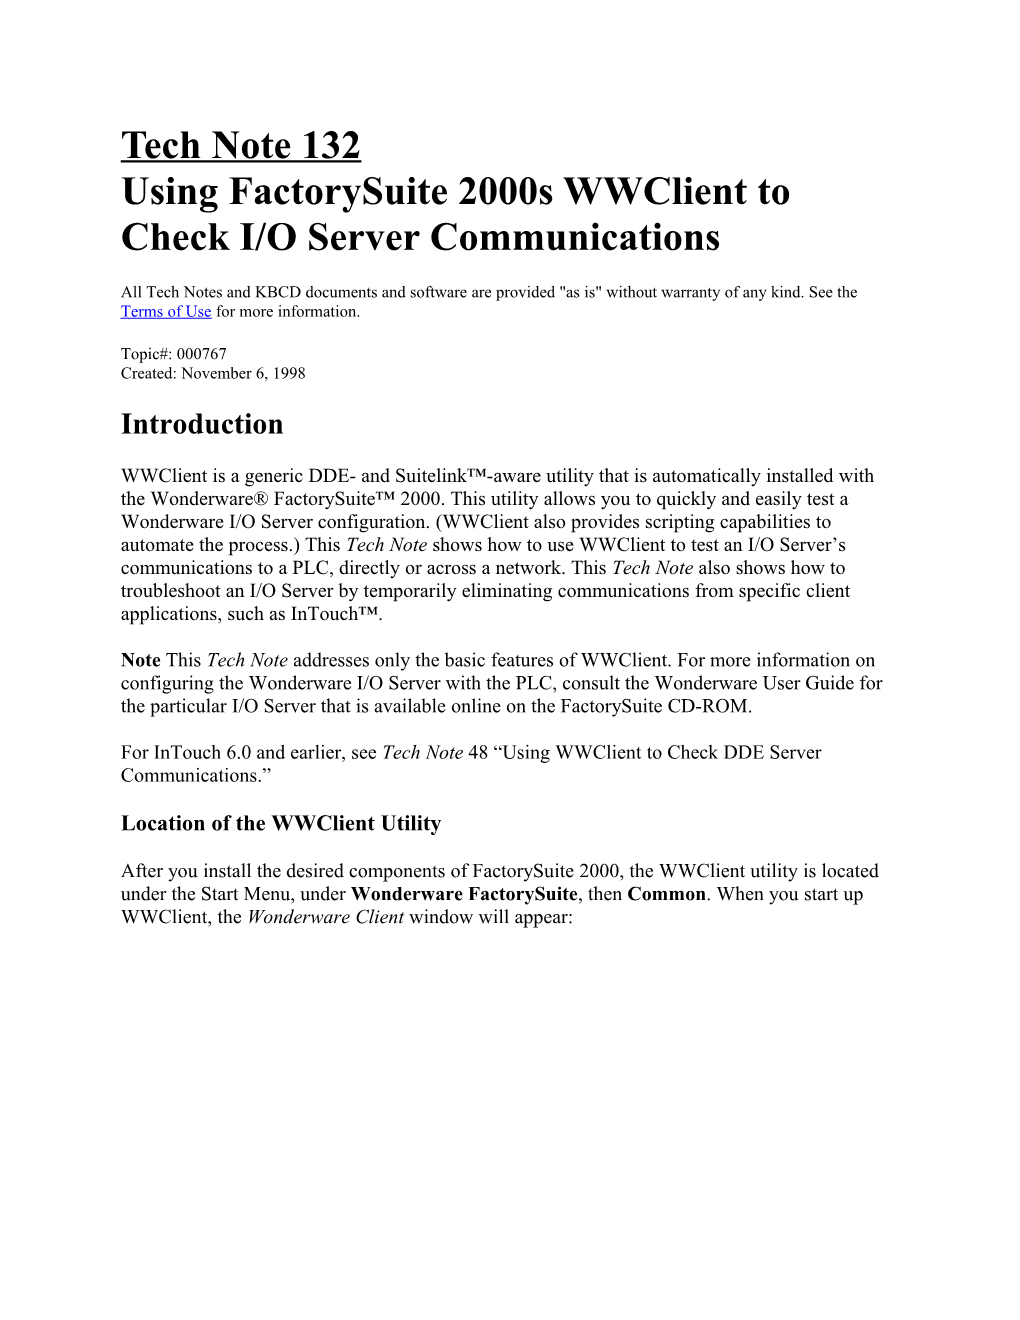 Tech Note 132 Using Factorysuite 2000S Wwclient to Check I/O Server Communications